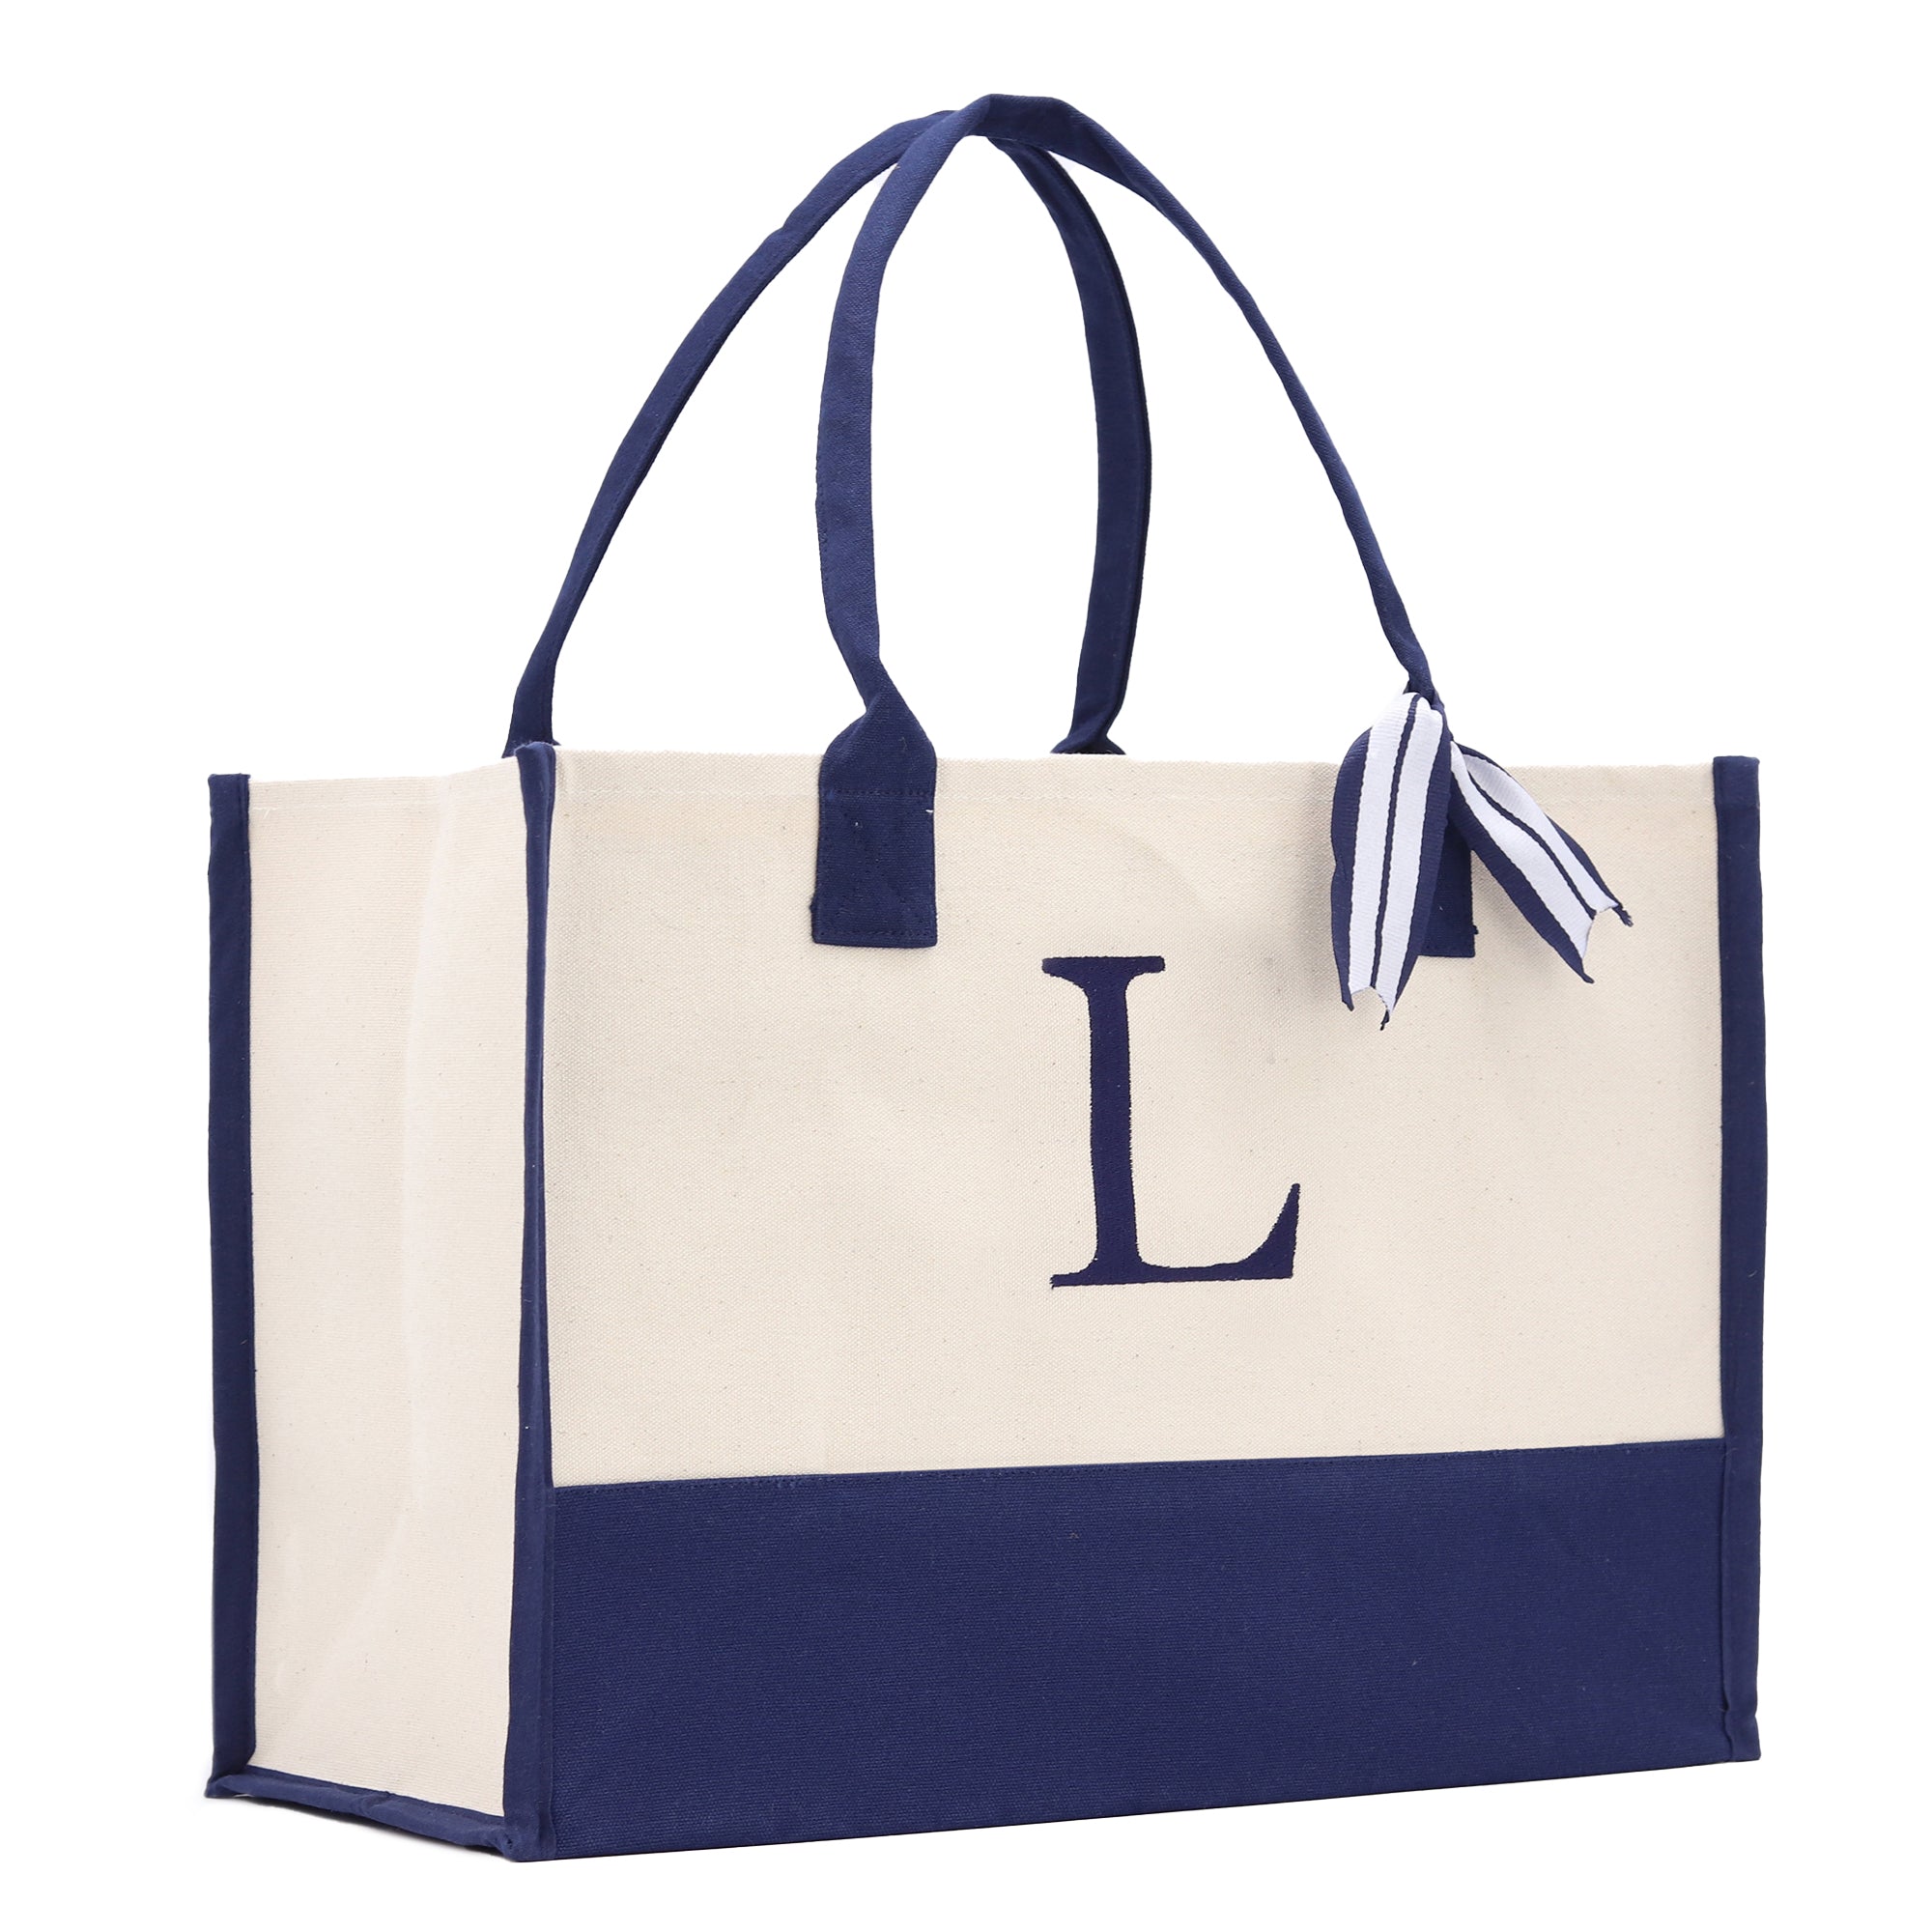 Monogram Tote Bag with 100% Cotton Canvas and a Chic Personalized Monogram Navy Blue Vanessa Rosella Block L 